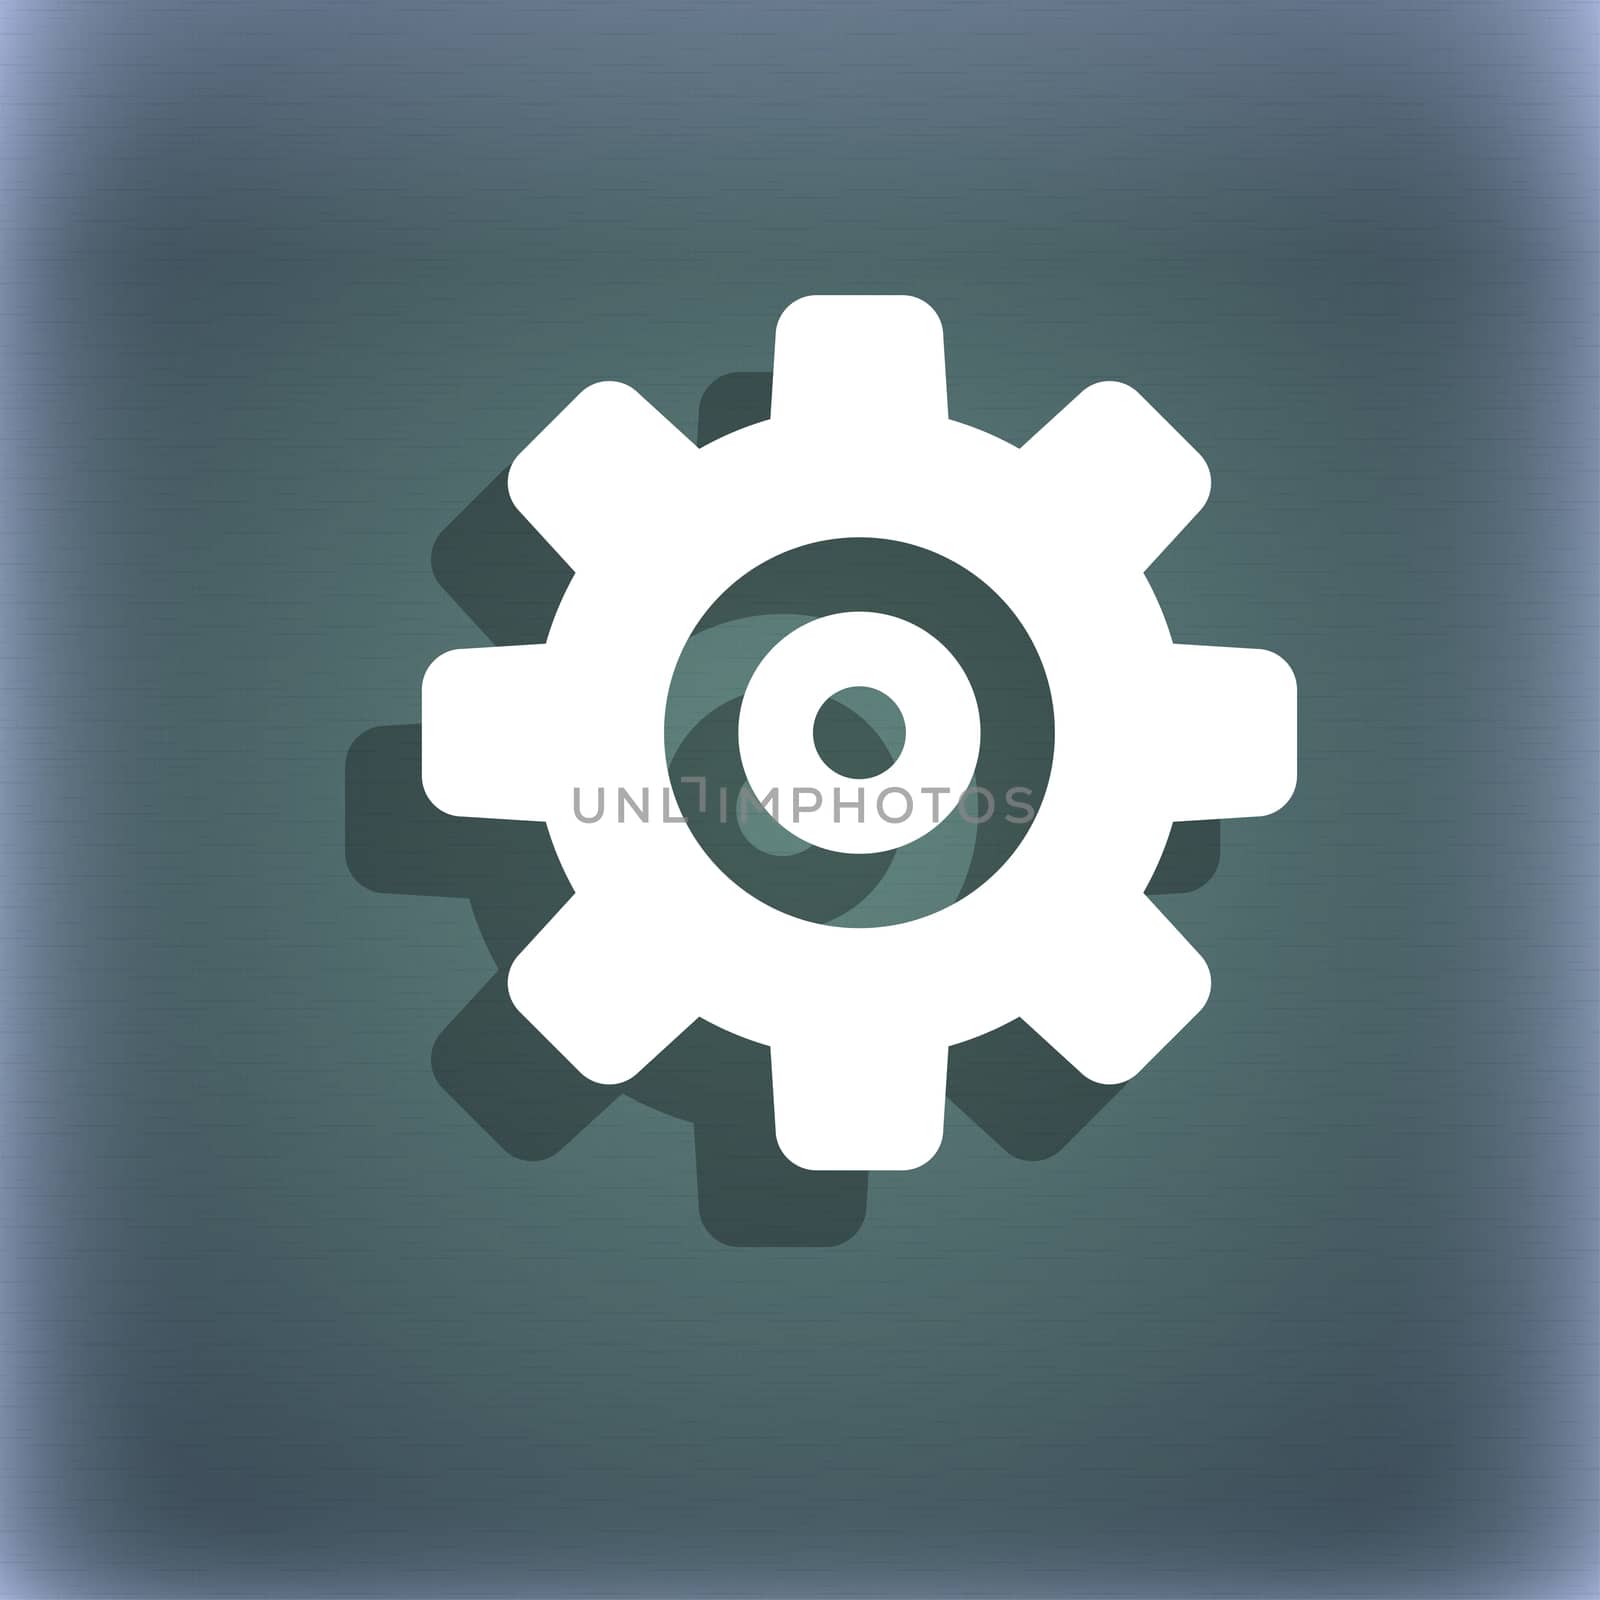 Cog settings, Cogwheel gear mechanism icon symbol on the blue-green abstract background with shadow and space for your text. illustration